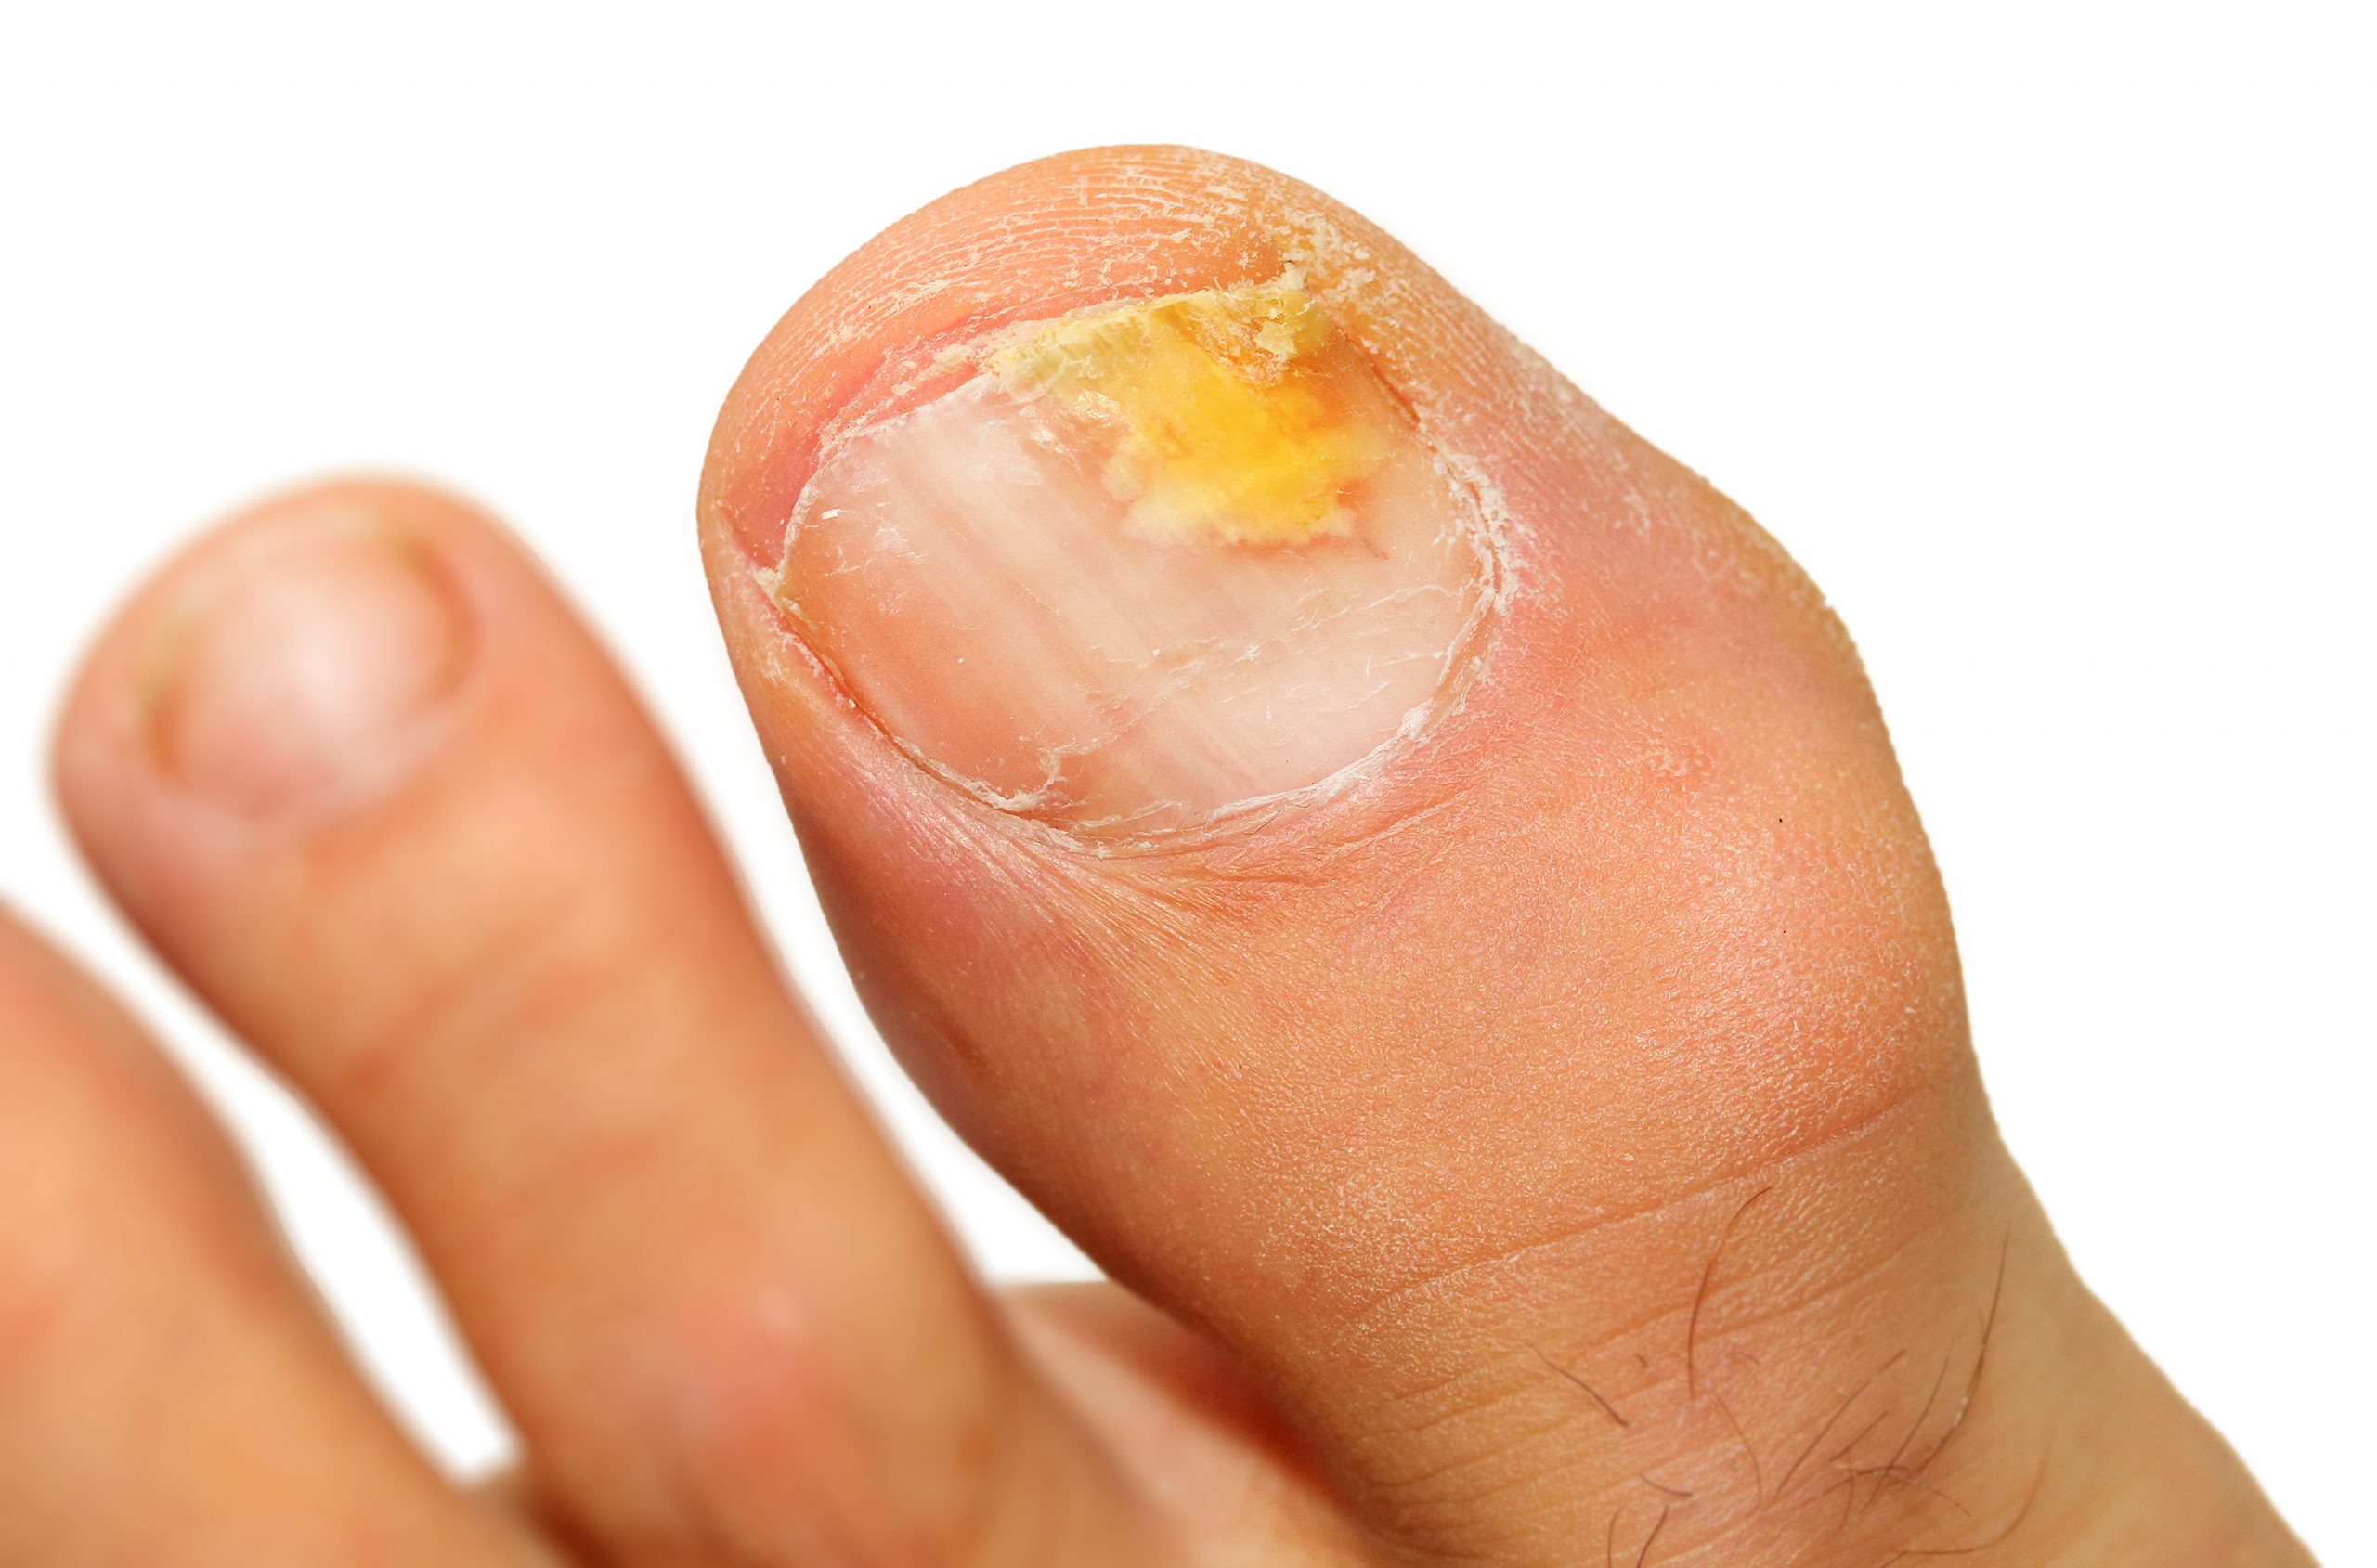 Fungal Foot Infections